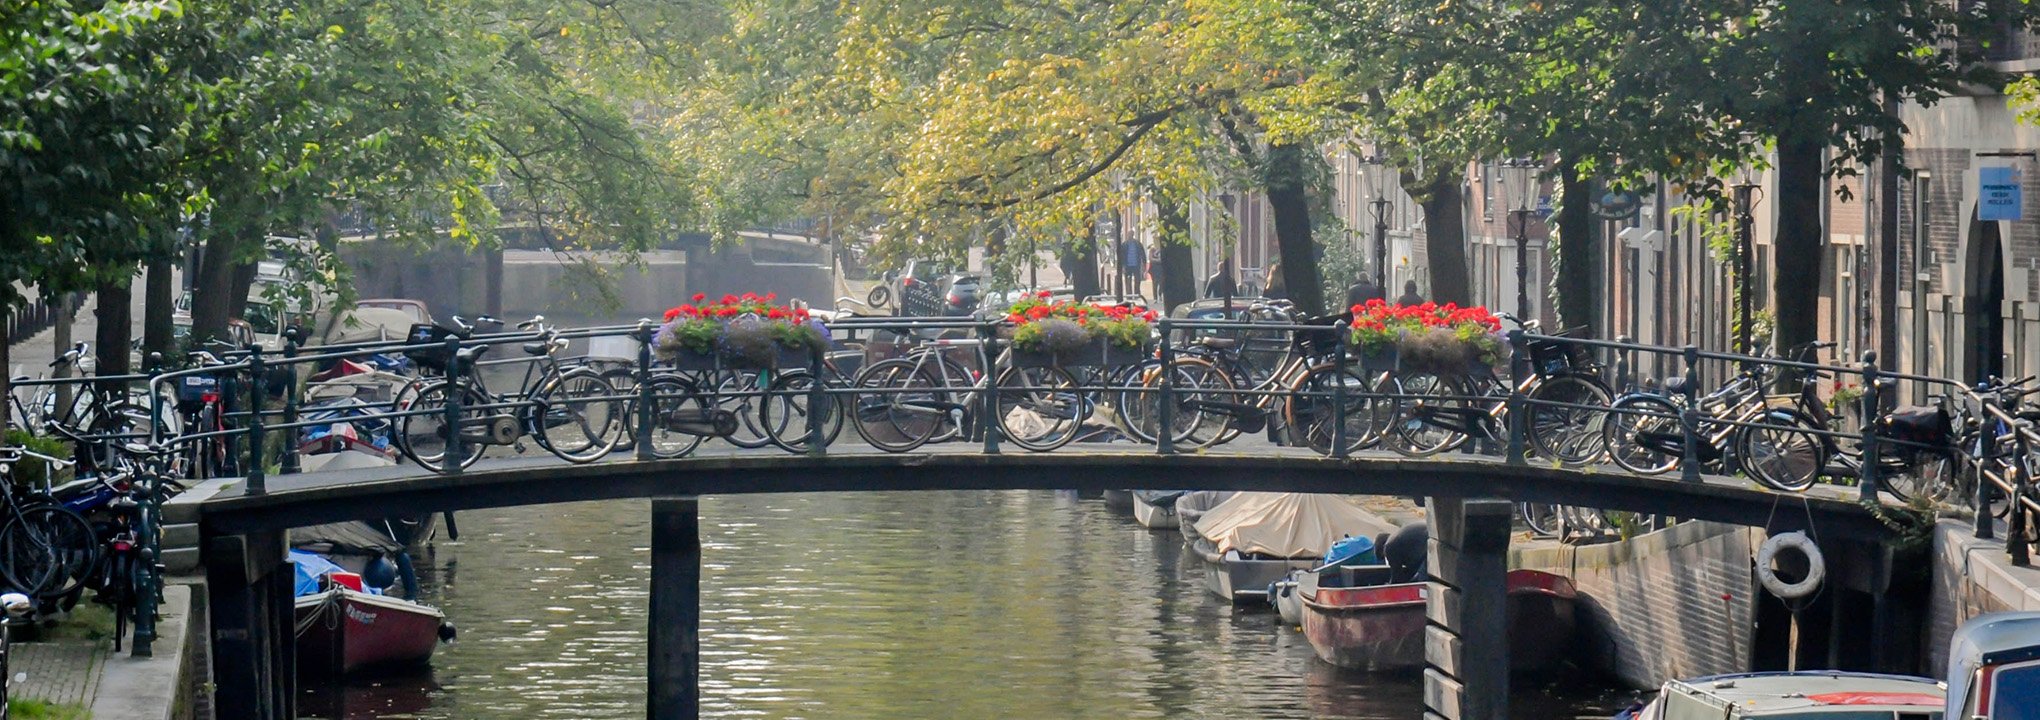 Visit Amsterdam city center
and its canals